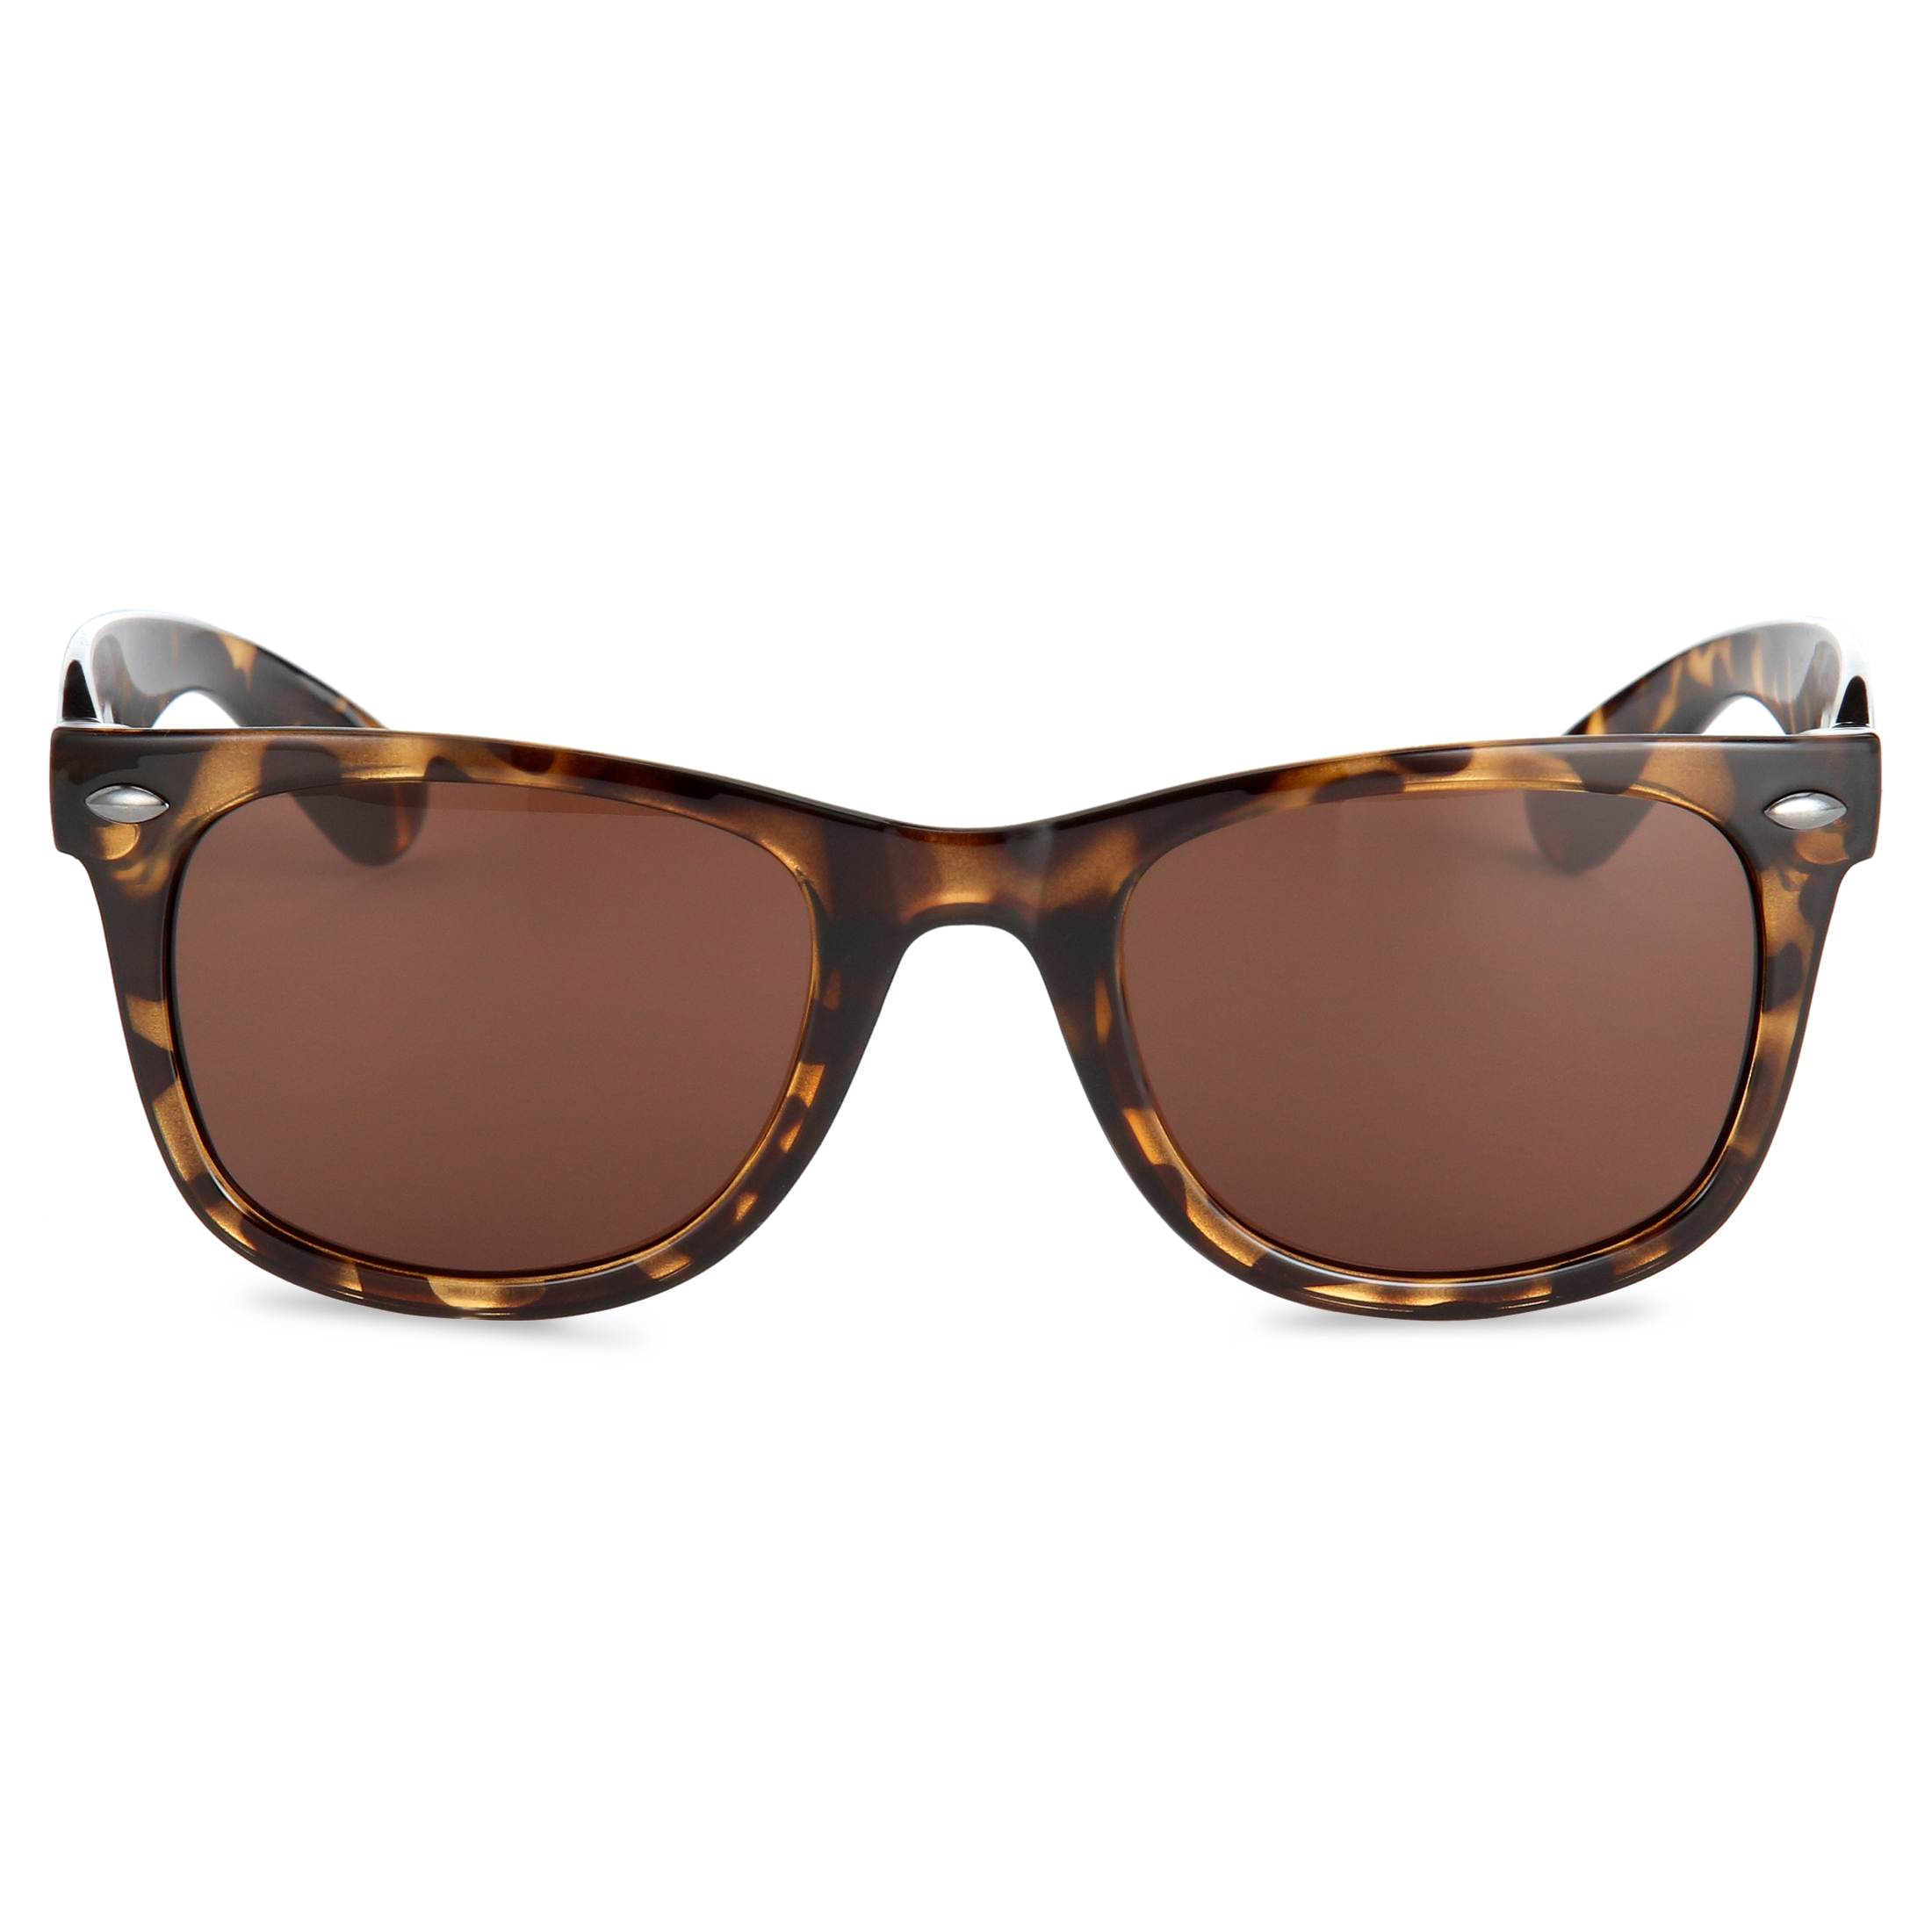 DNA Womens Rx'able Sunglasses, A2008, Tortoise, 50-21-148 - image 1 of 6